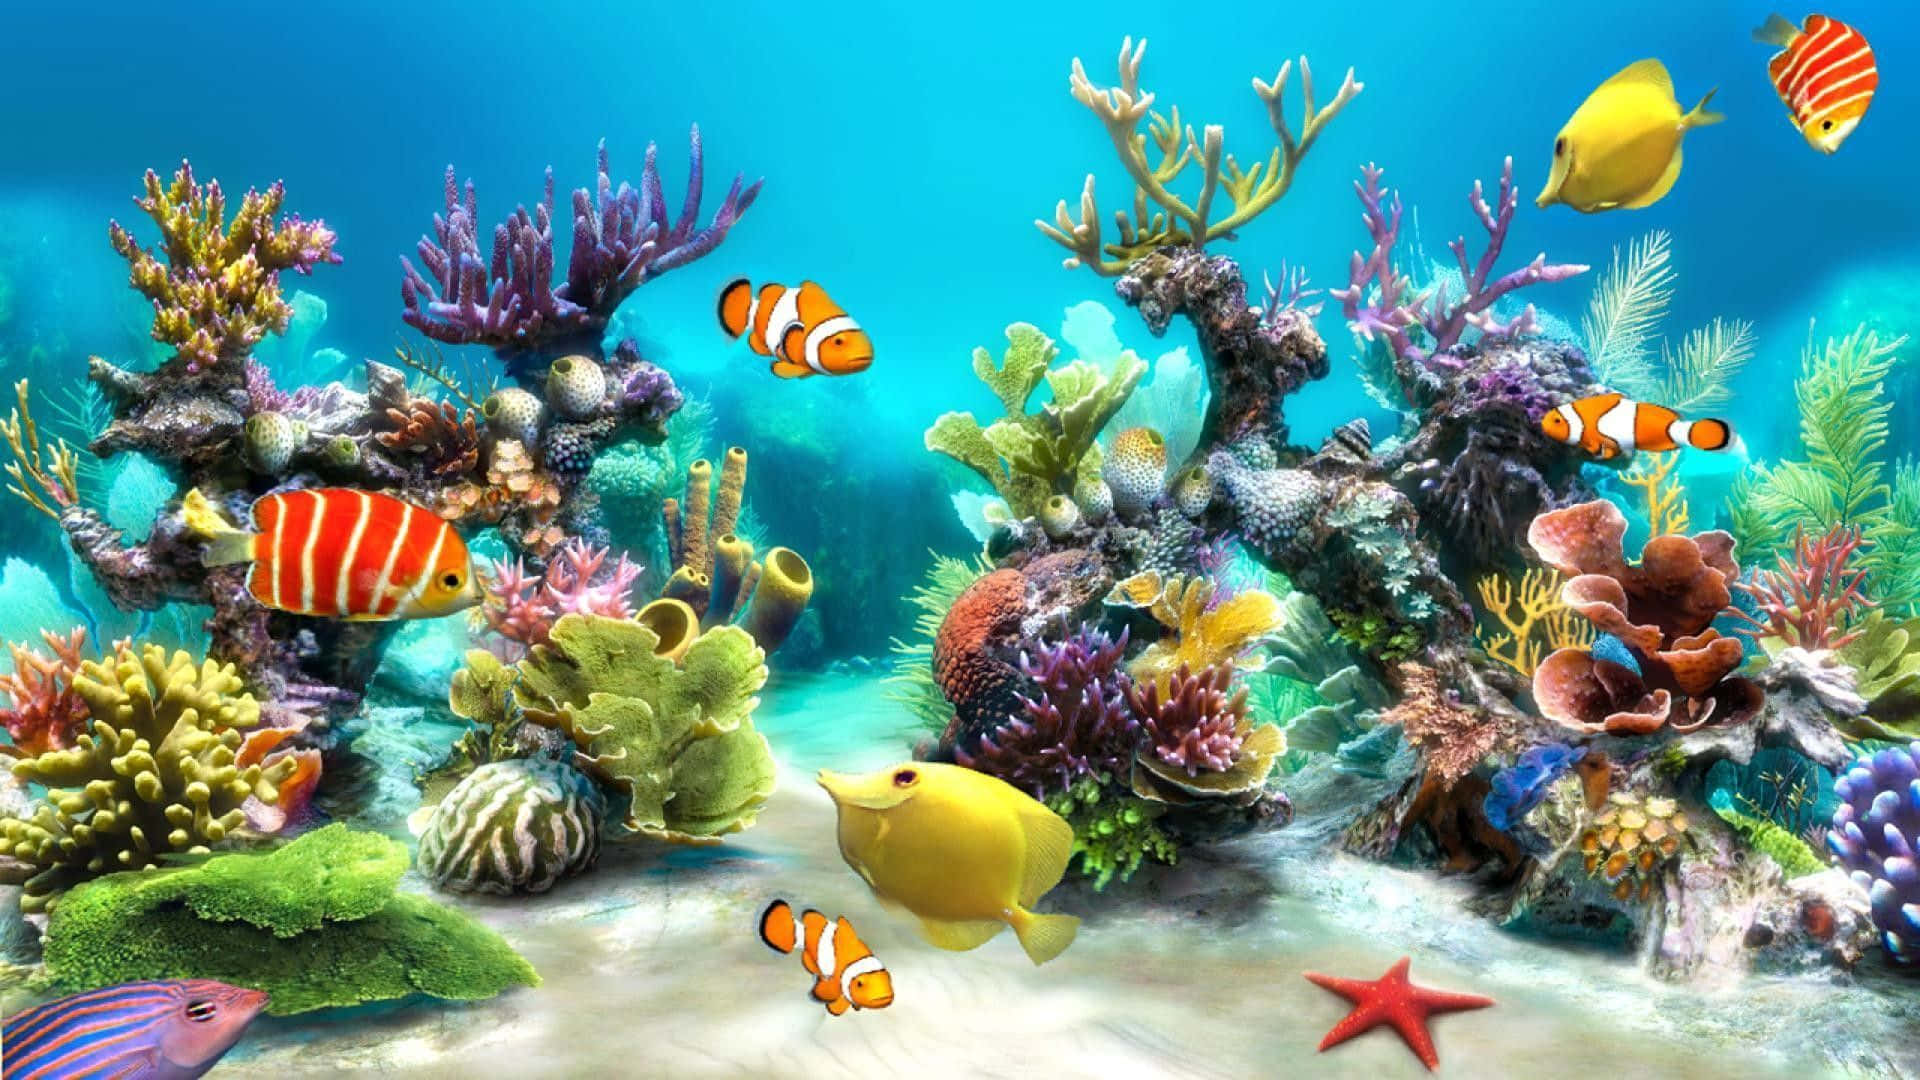 Relax and Rejuvenate with Spectacular Views of Naturally Swaying Fishes in a Tropical Aquarium Fish Tank Wallpaper